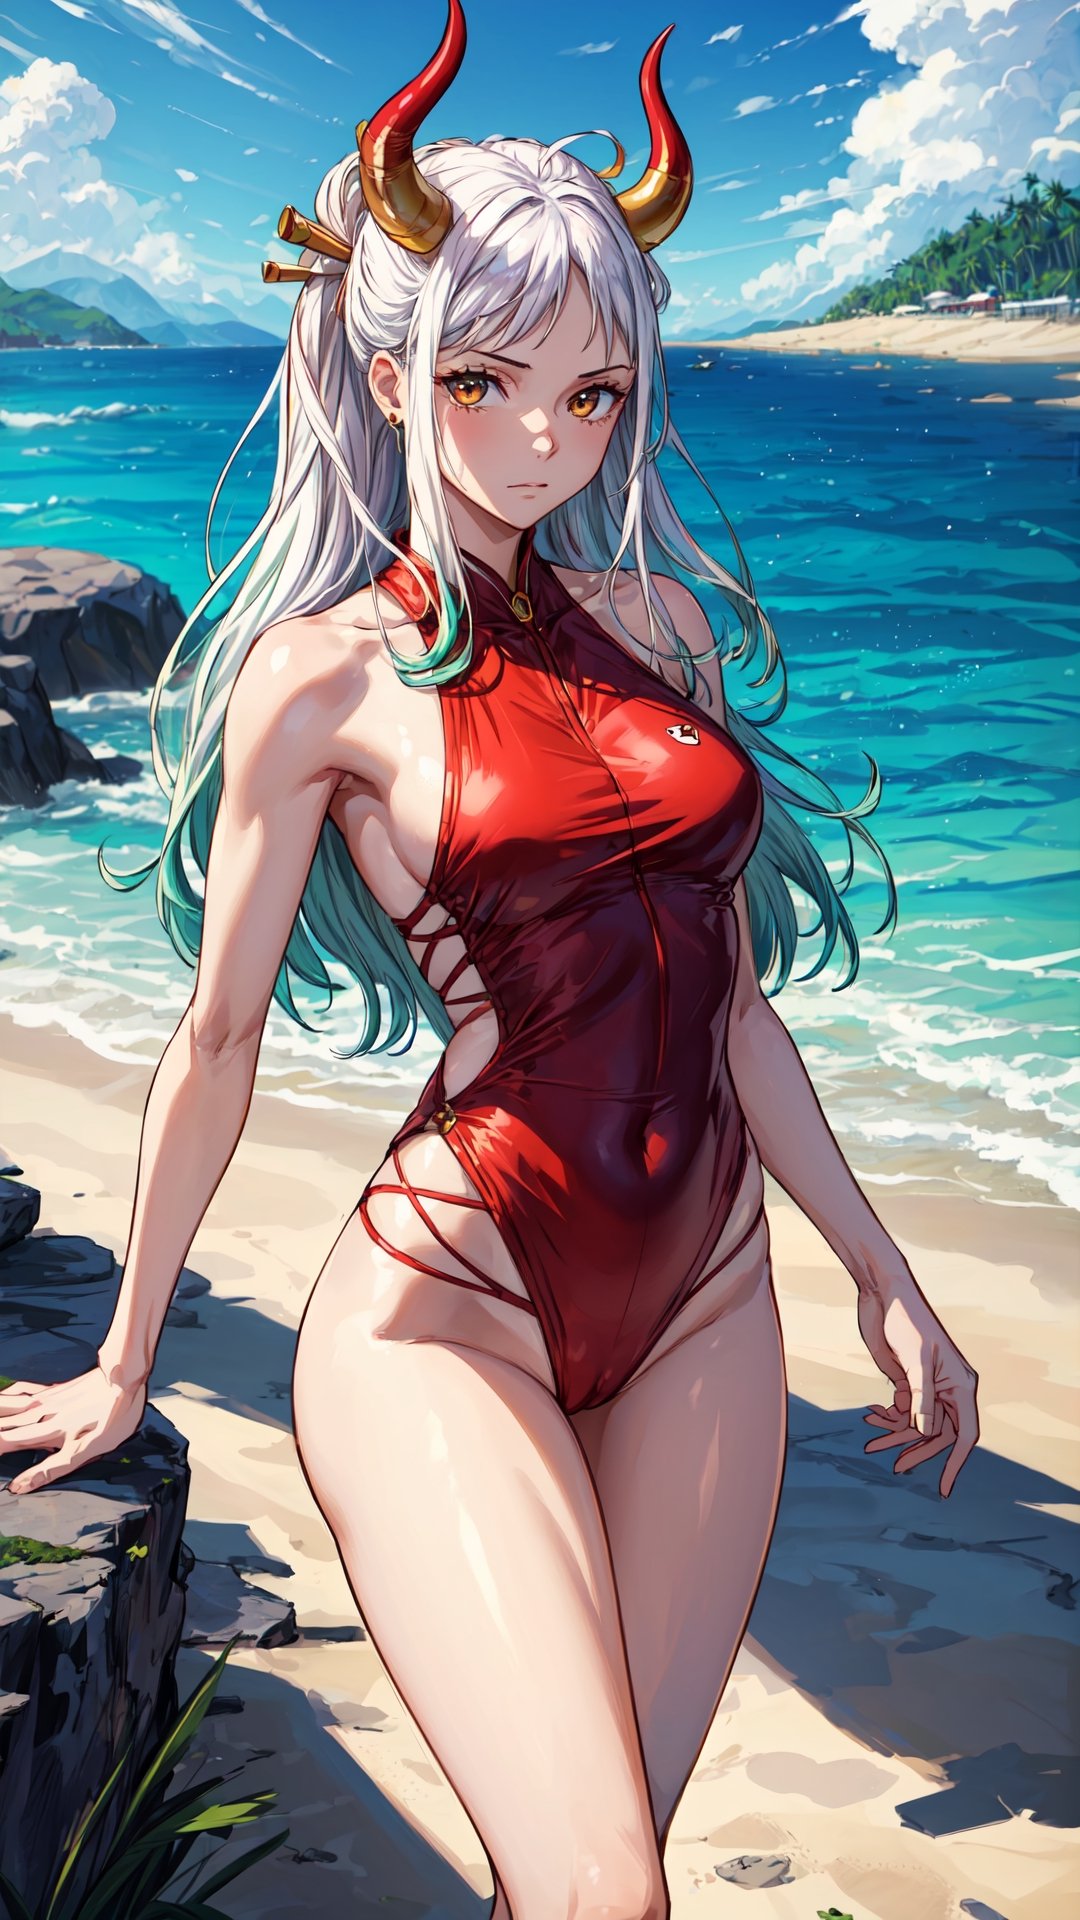 {(Yamato)}, 1girl, {(anime, 8k, masterpiece, best quality, best quality, beautiful and aesthetic, professional illustration, ultra detail, perfect lighting, perfect shadow, perfect sharpness, HDR)}, {( White hair with green tips, long hair, red horns on the head, beautiful hair, detailed hair, shining hair)}, {(golden eyes, very detailed eyes, beautiful eyes, shining eyes)}, {(detailed face, detailed nose, detailed mouth, beautiful face)}, {(athletic and sensual body, perfect body, perfect arms, perfect hands, perfect legs, detailed body, beautiful body)}, {(wearing red clothes, very detailed clothes, beautiful clothes) }, {(standing, Expression of happiness)}, {(paradise beach view, very detailed view, very beautiful view, high quality view)}, {(summer day, sunny, very detailed sky, high quality sky, clear sky beautiful, perfect sky)}, {(yamato\(one piece\))}